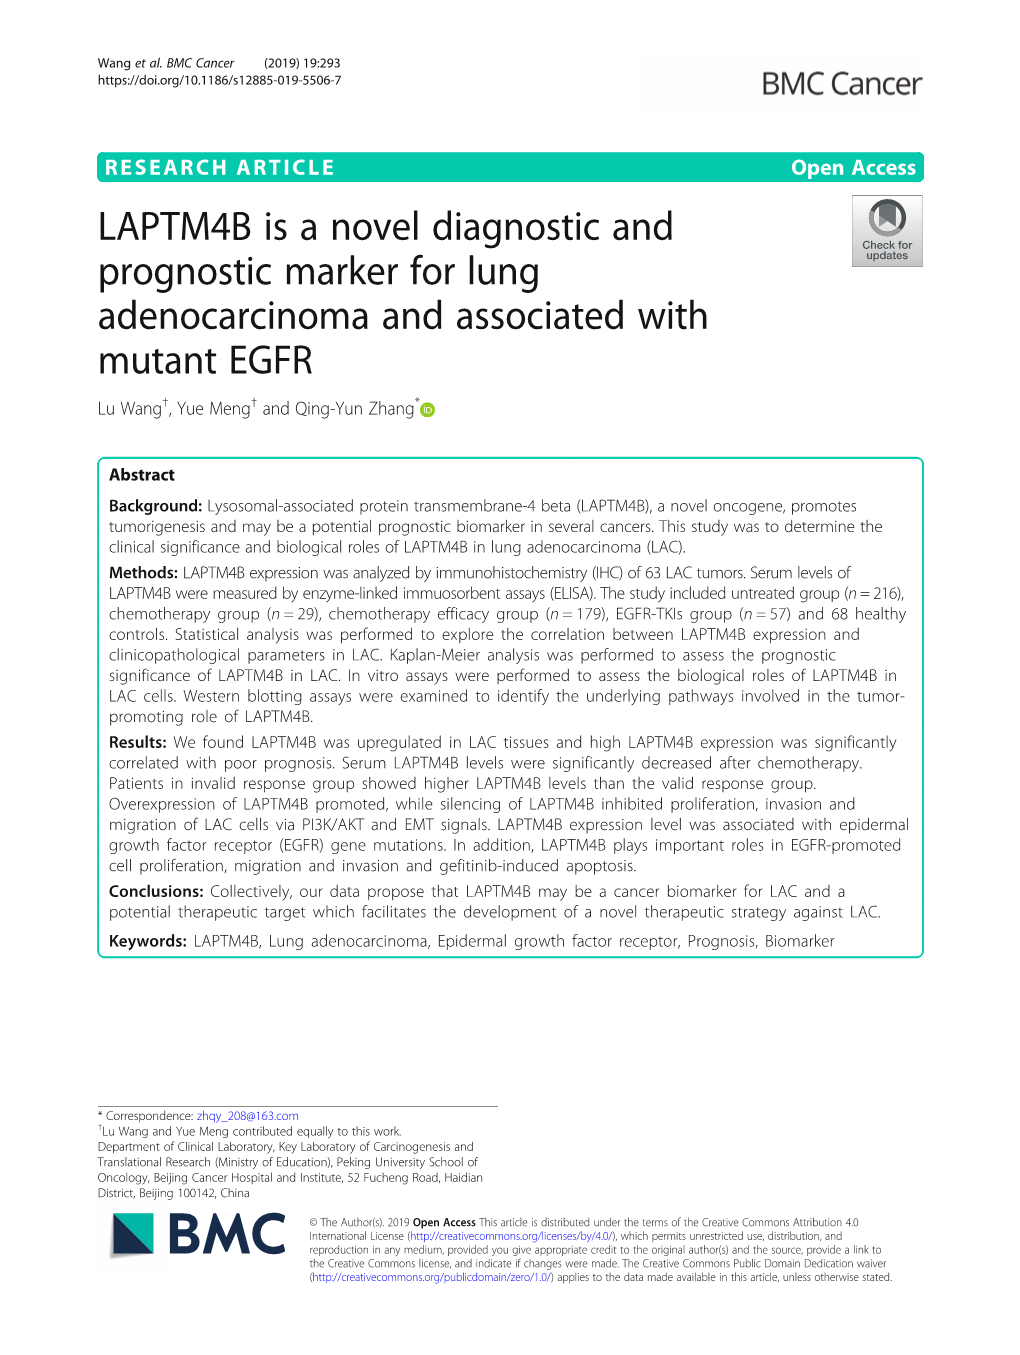 LAPTM4B Is a Novel Diagnostic and Prognostic Marker for Lung Adenocarcinoma and Associated with Mutant EGFR Lu Wang†, Yue Meng† and Qing-Yun Zhang*